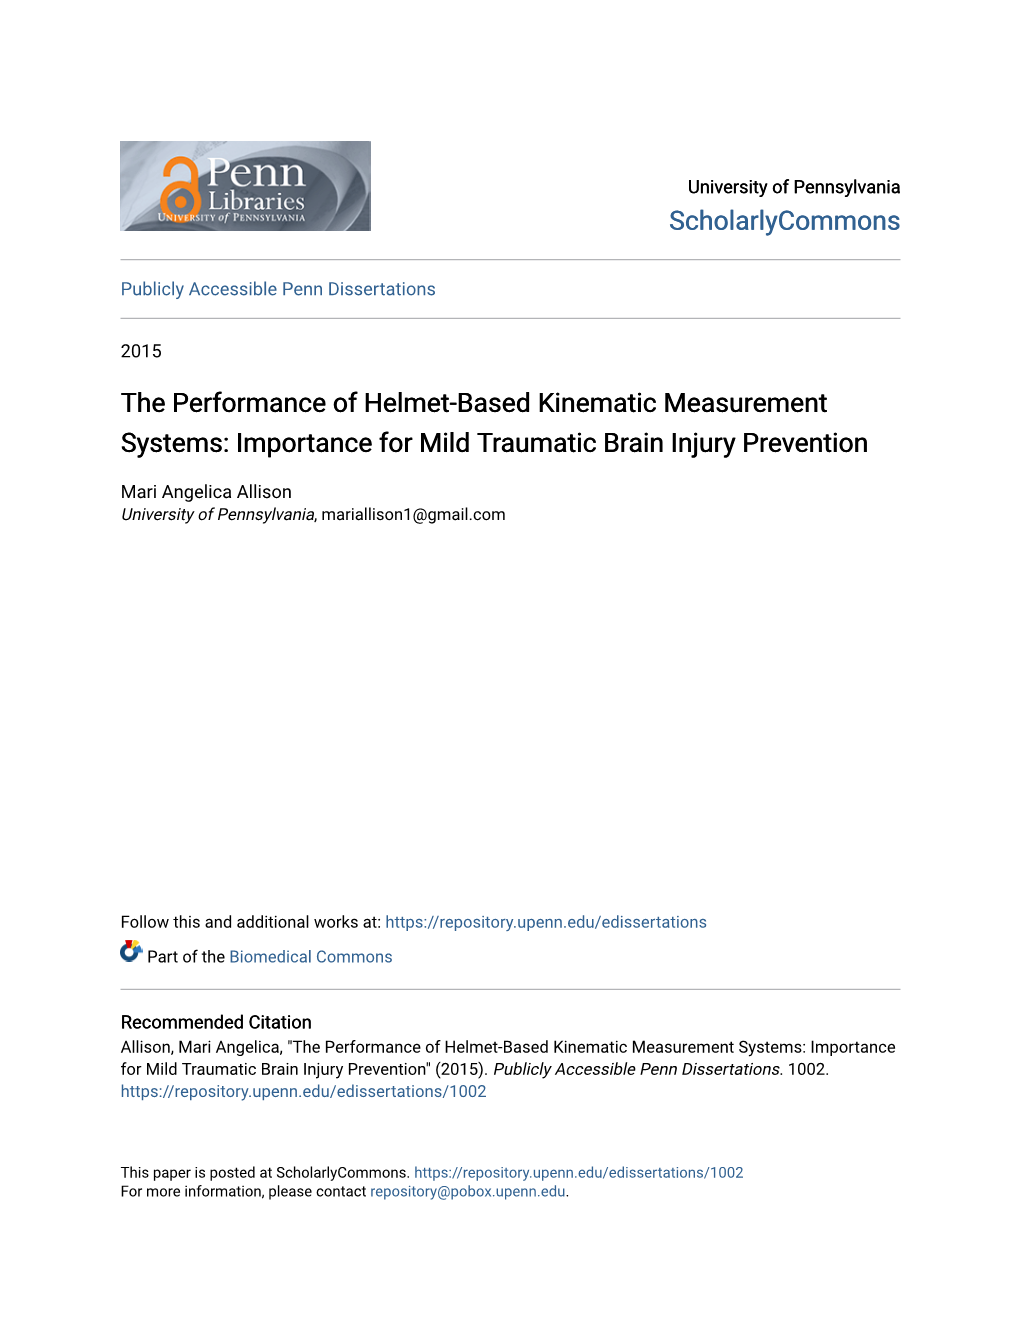 The Performance of Helmet-Based Kinematic Measurement Systems: Importance for Mild Traumatic Brain Injury Prevention